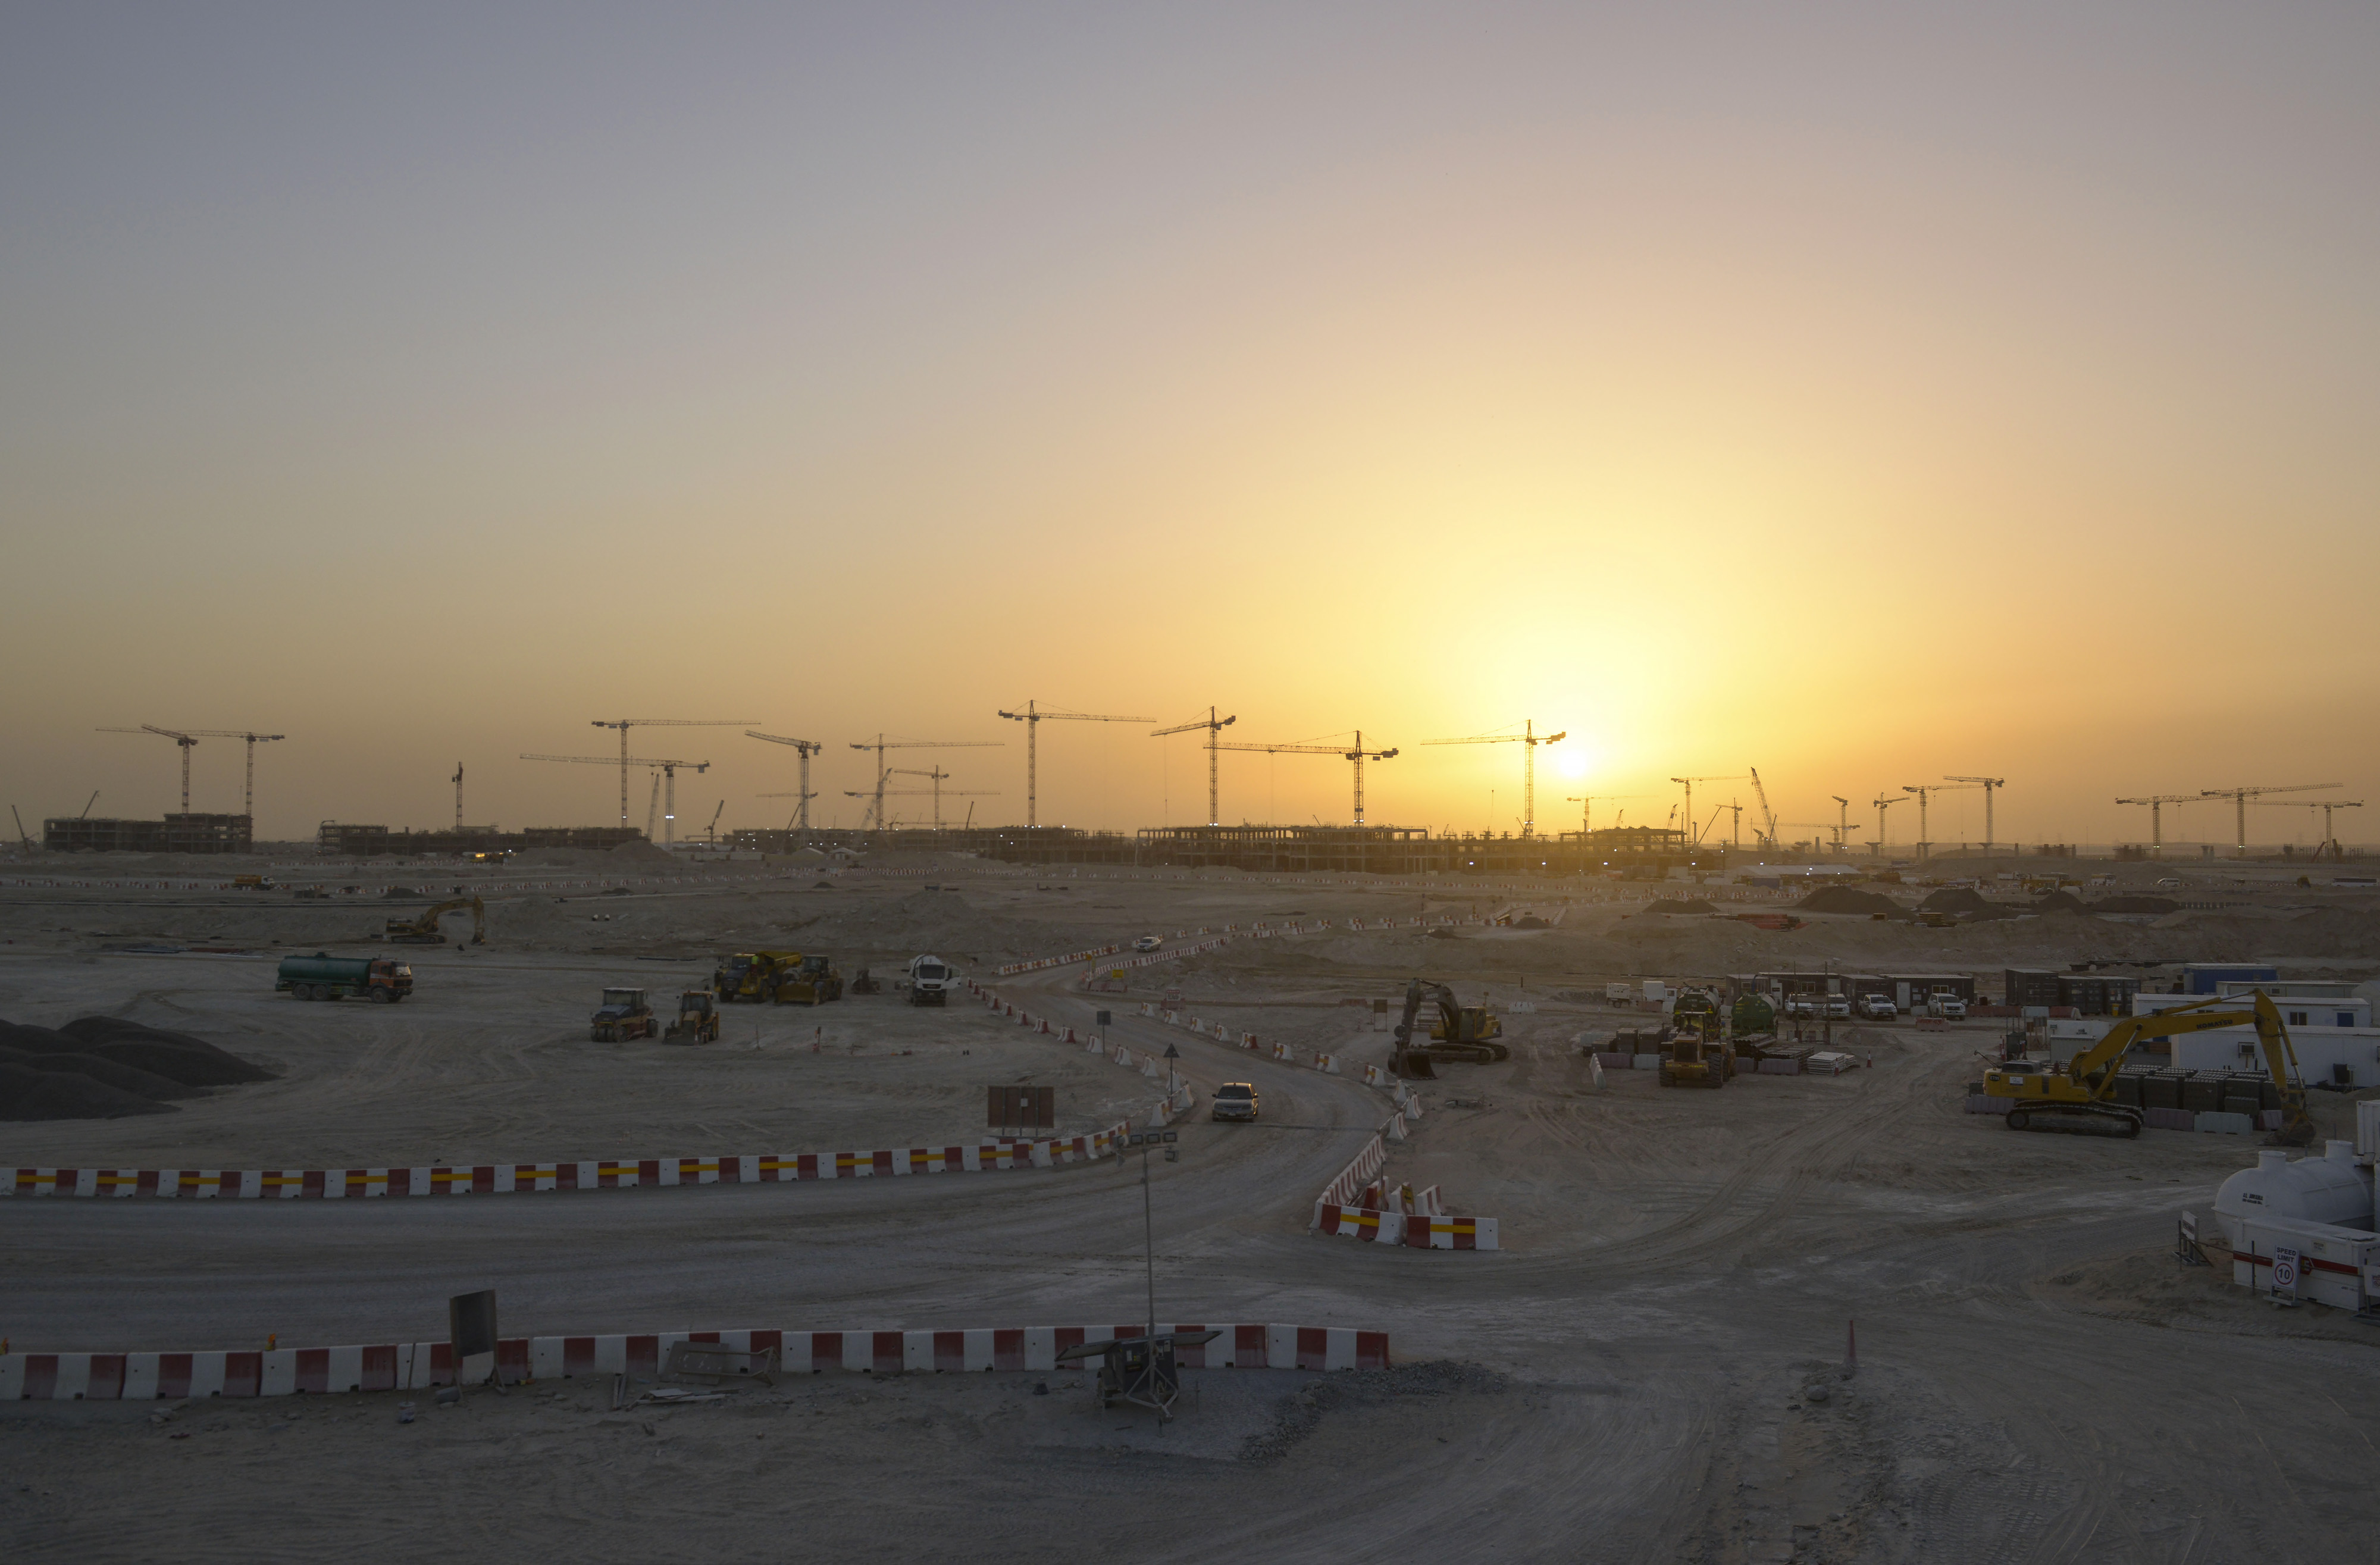 Construction at the Expo 2020 world exhibition site in Dubai.